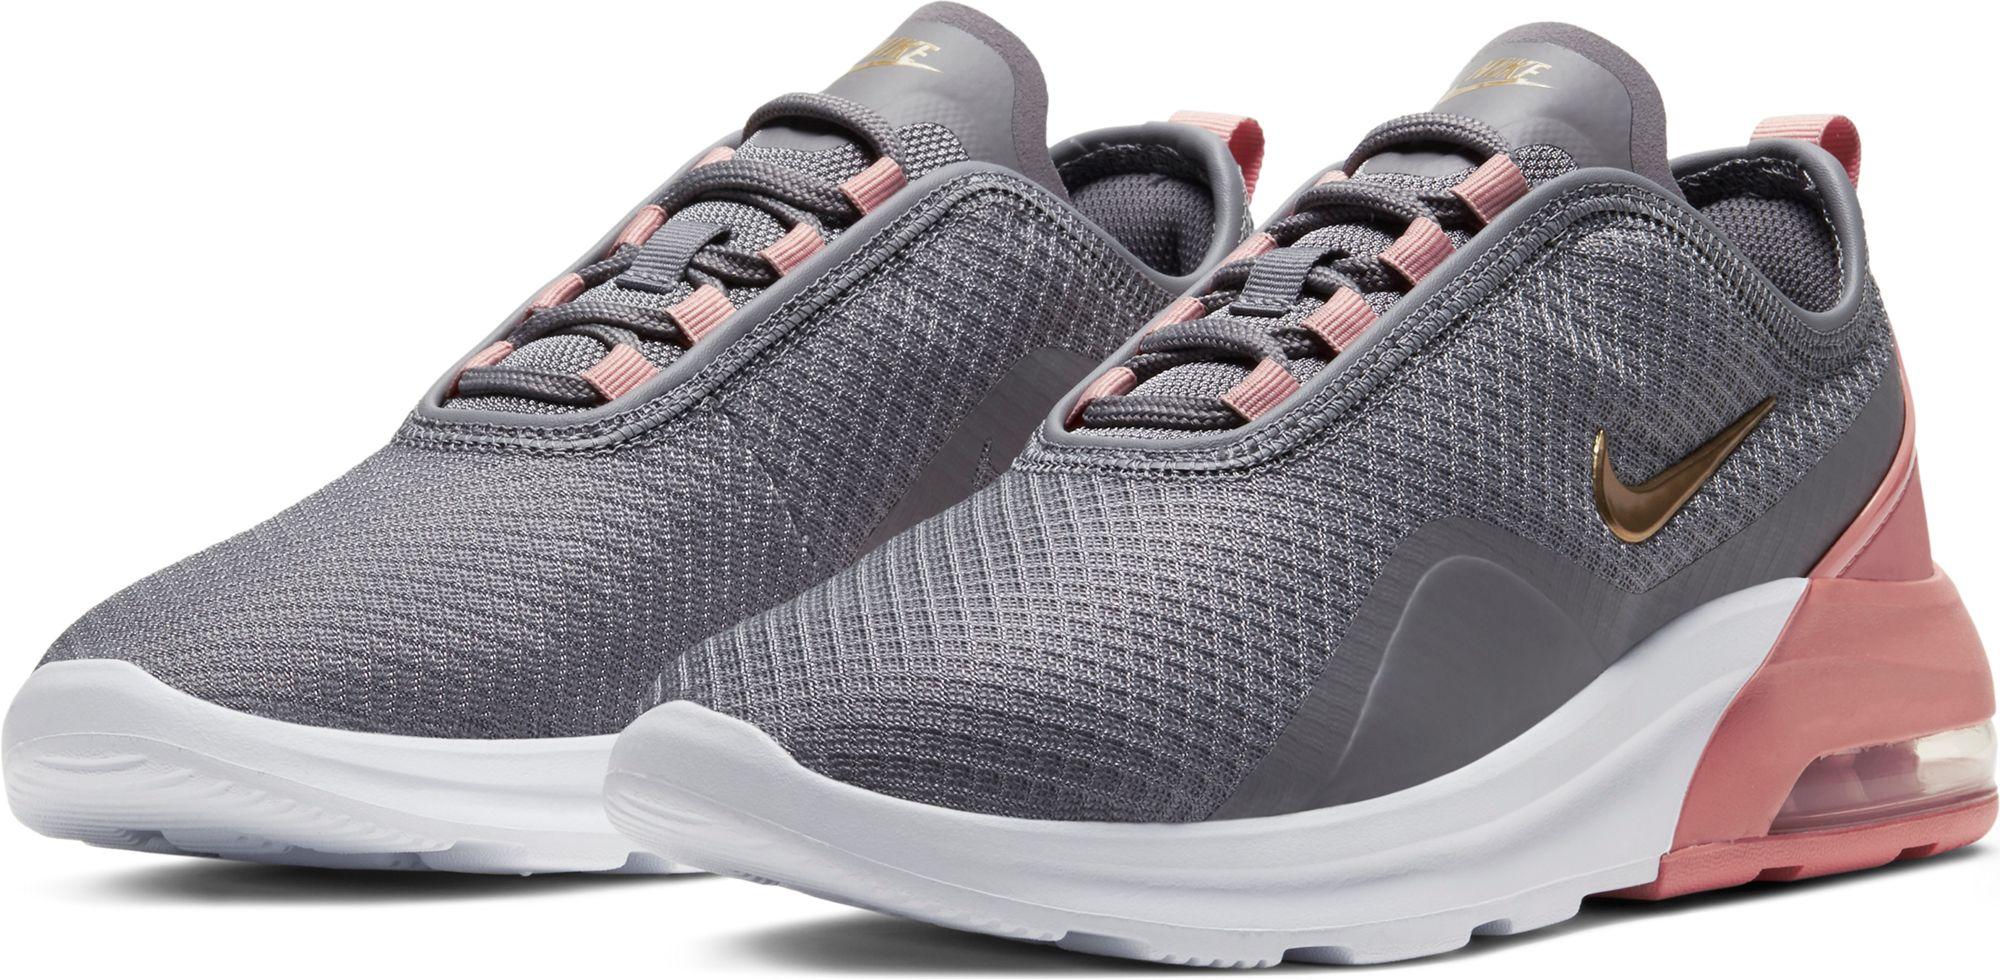 nike women's air max motion 2 shoes grey and peach